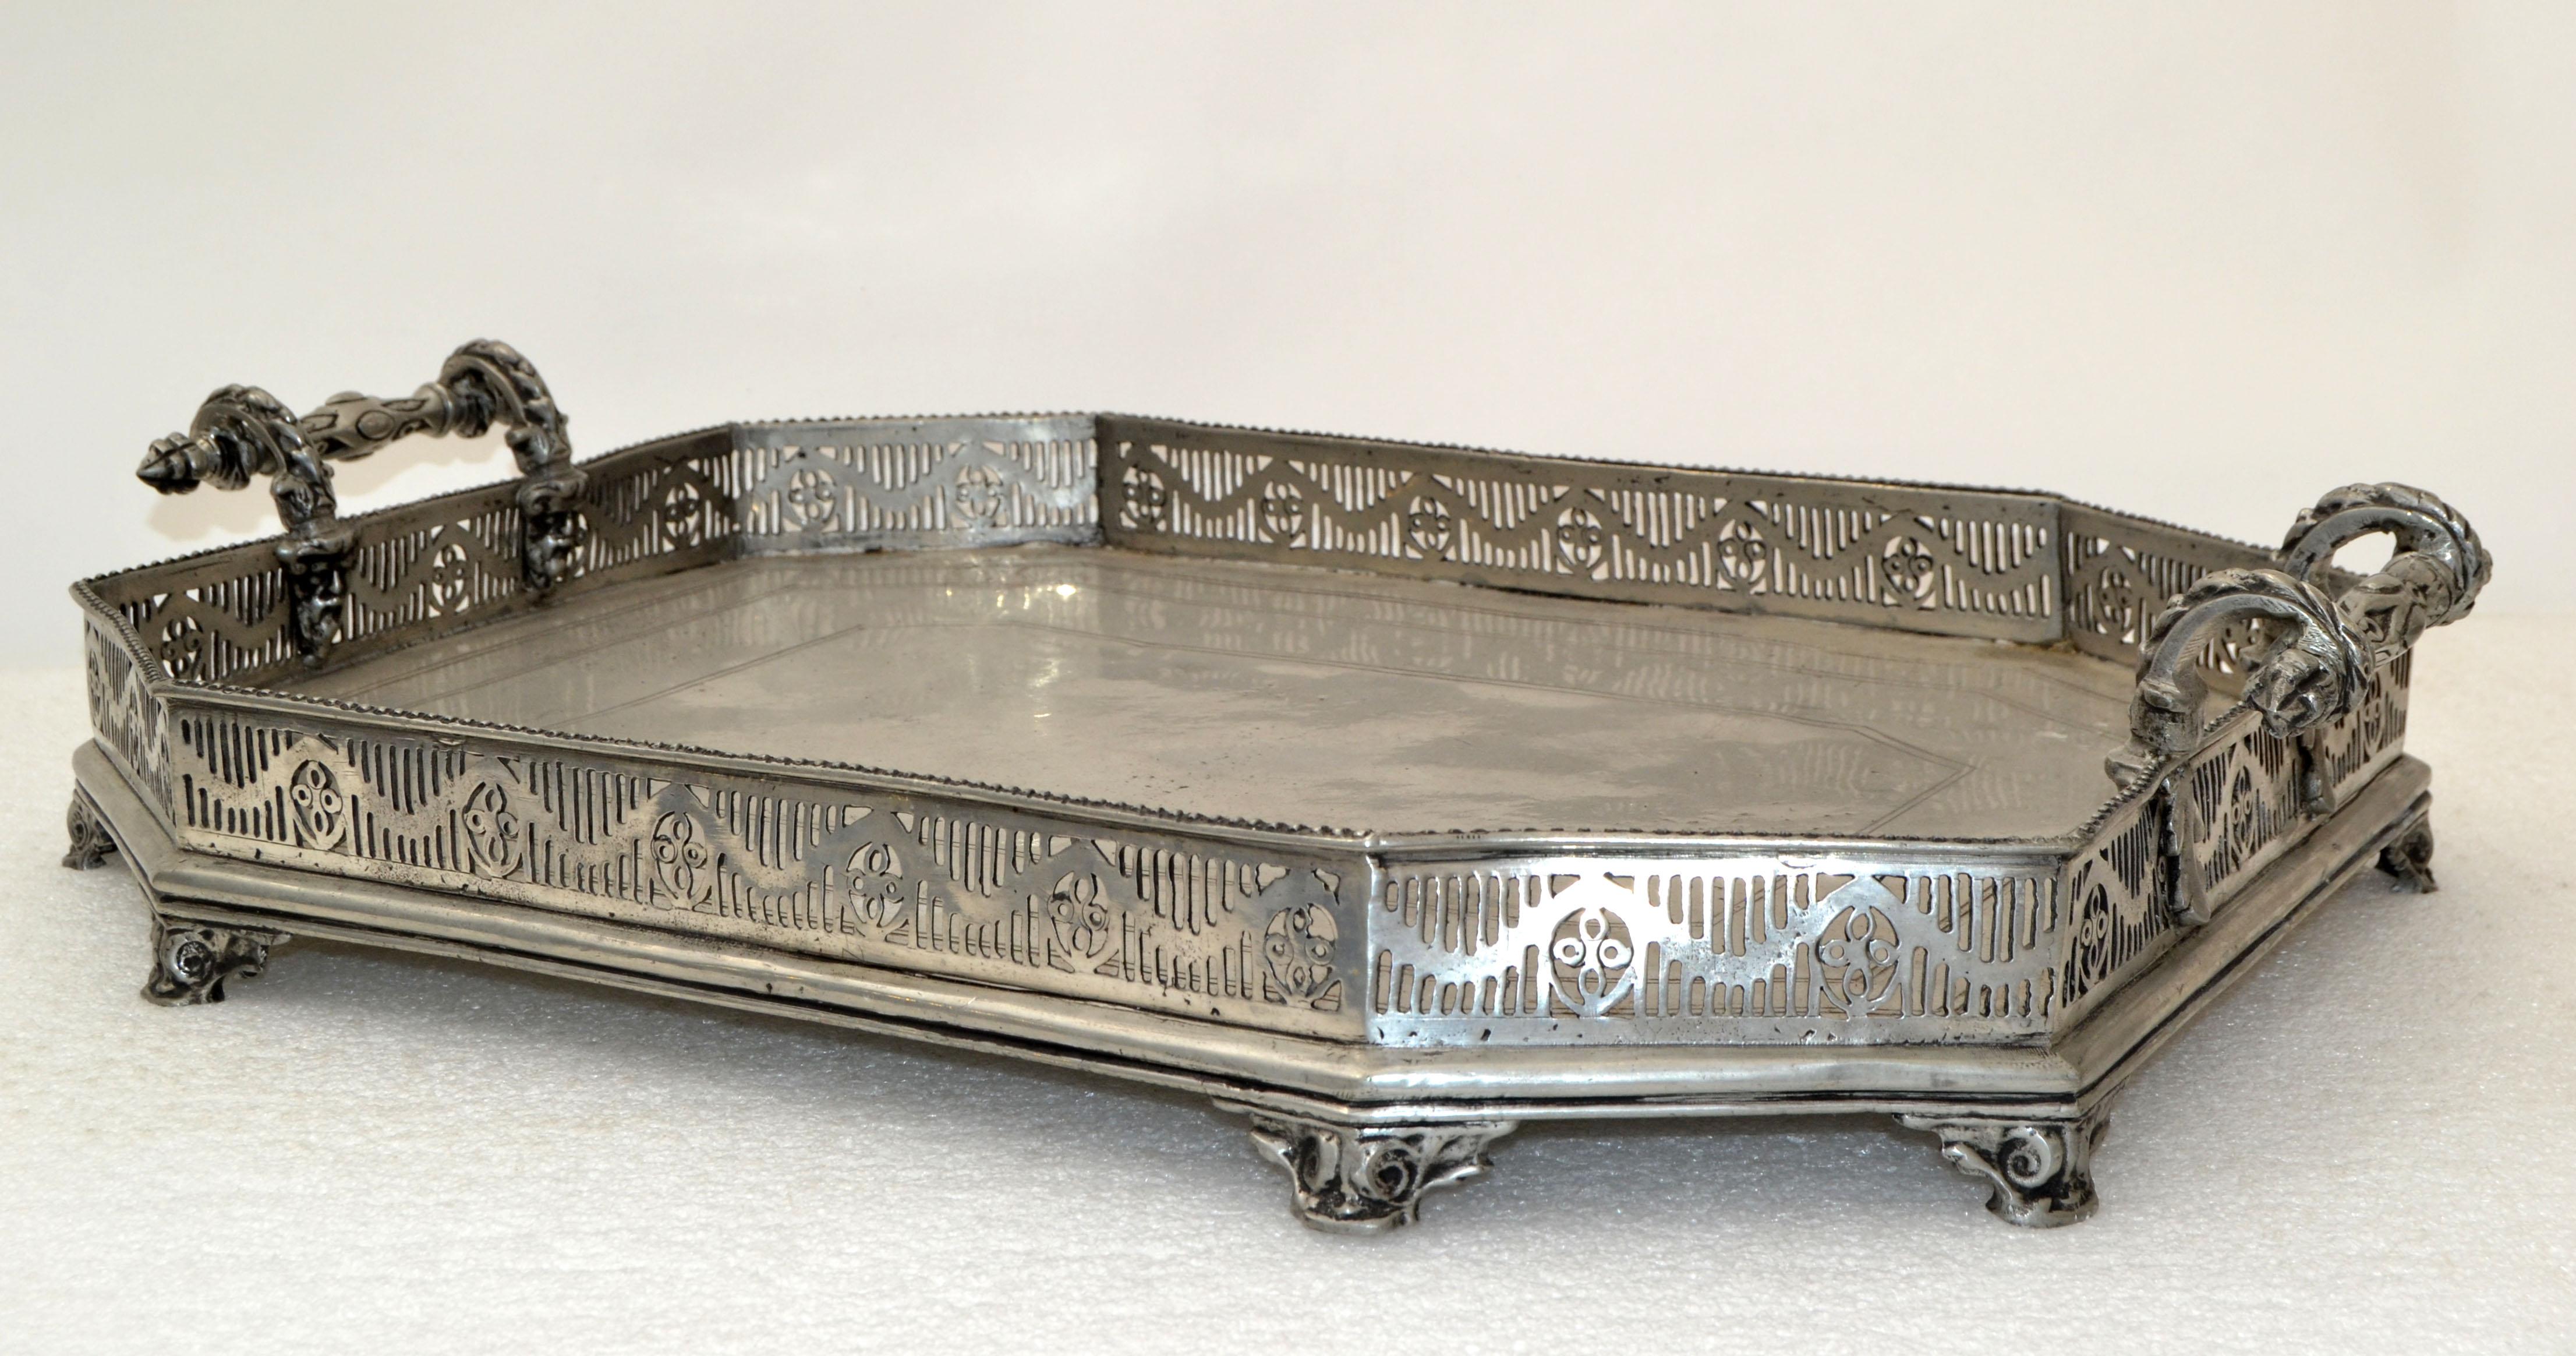 Vintage Spanish Gregorian style footed silver serving tray, platter with ornate handles. 
It is in original vintage condition and has some stains and is tarnished.
Trademark at the base & Espana.
Measures inside tray: 21.5 x 15.63 inches.